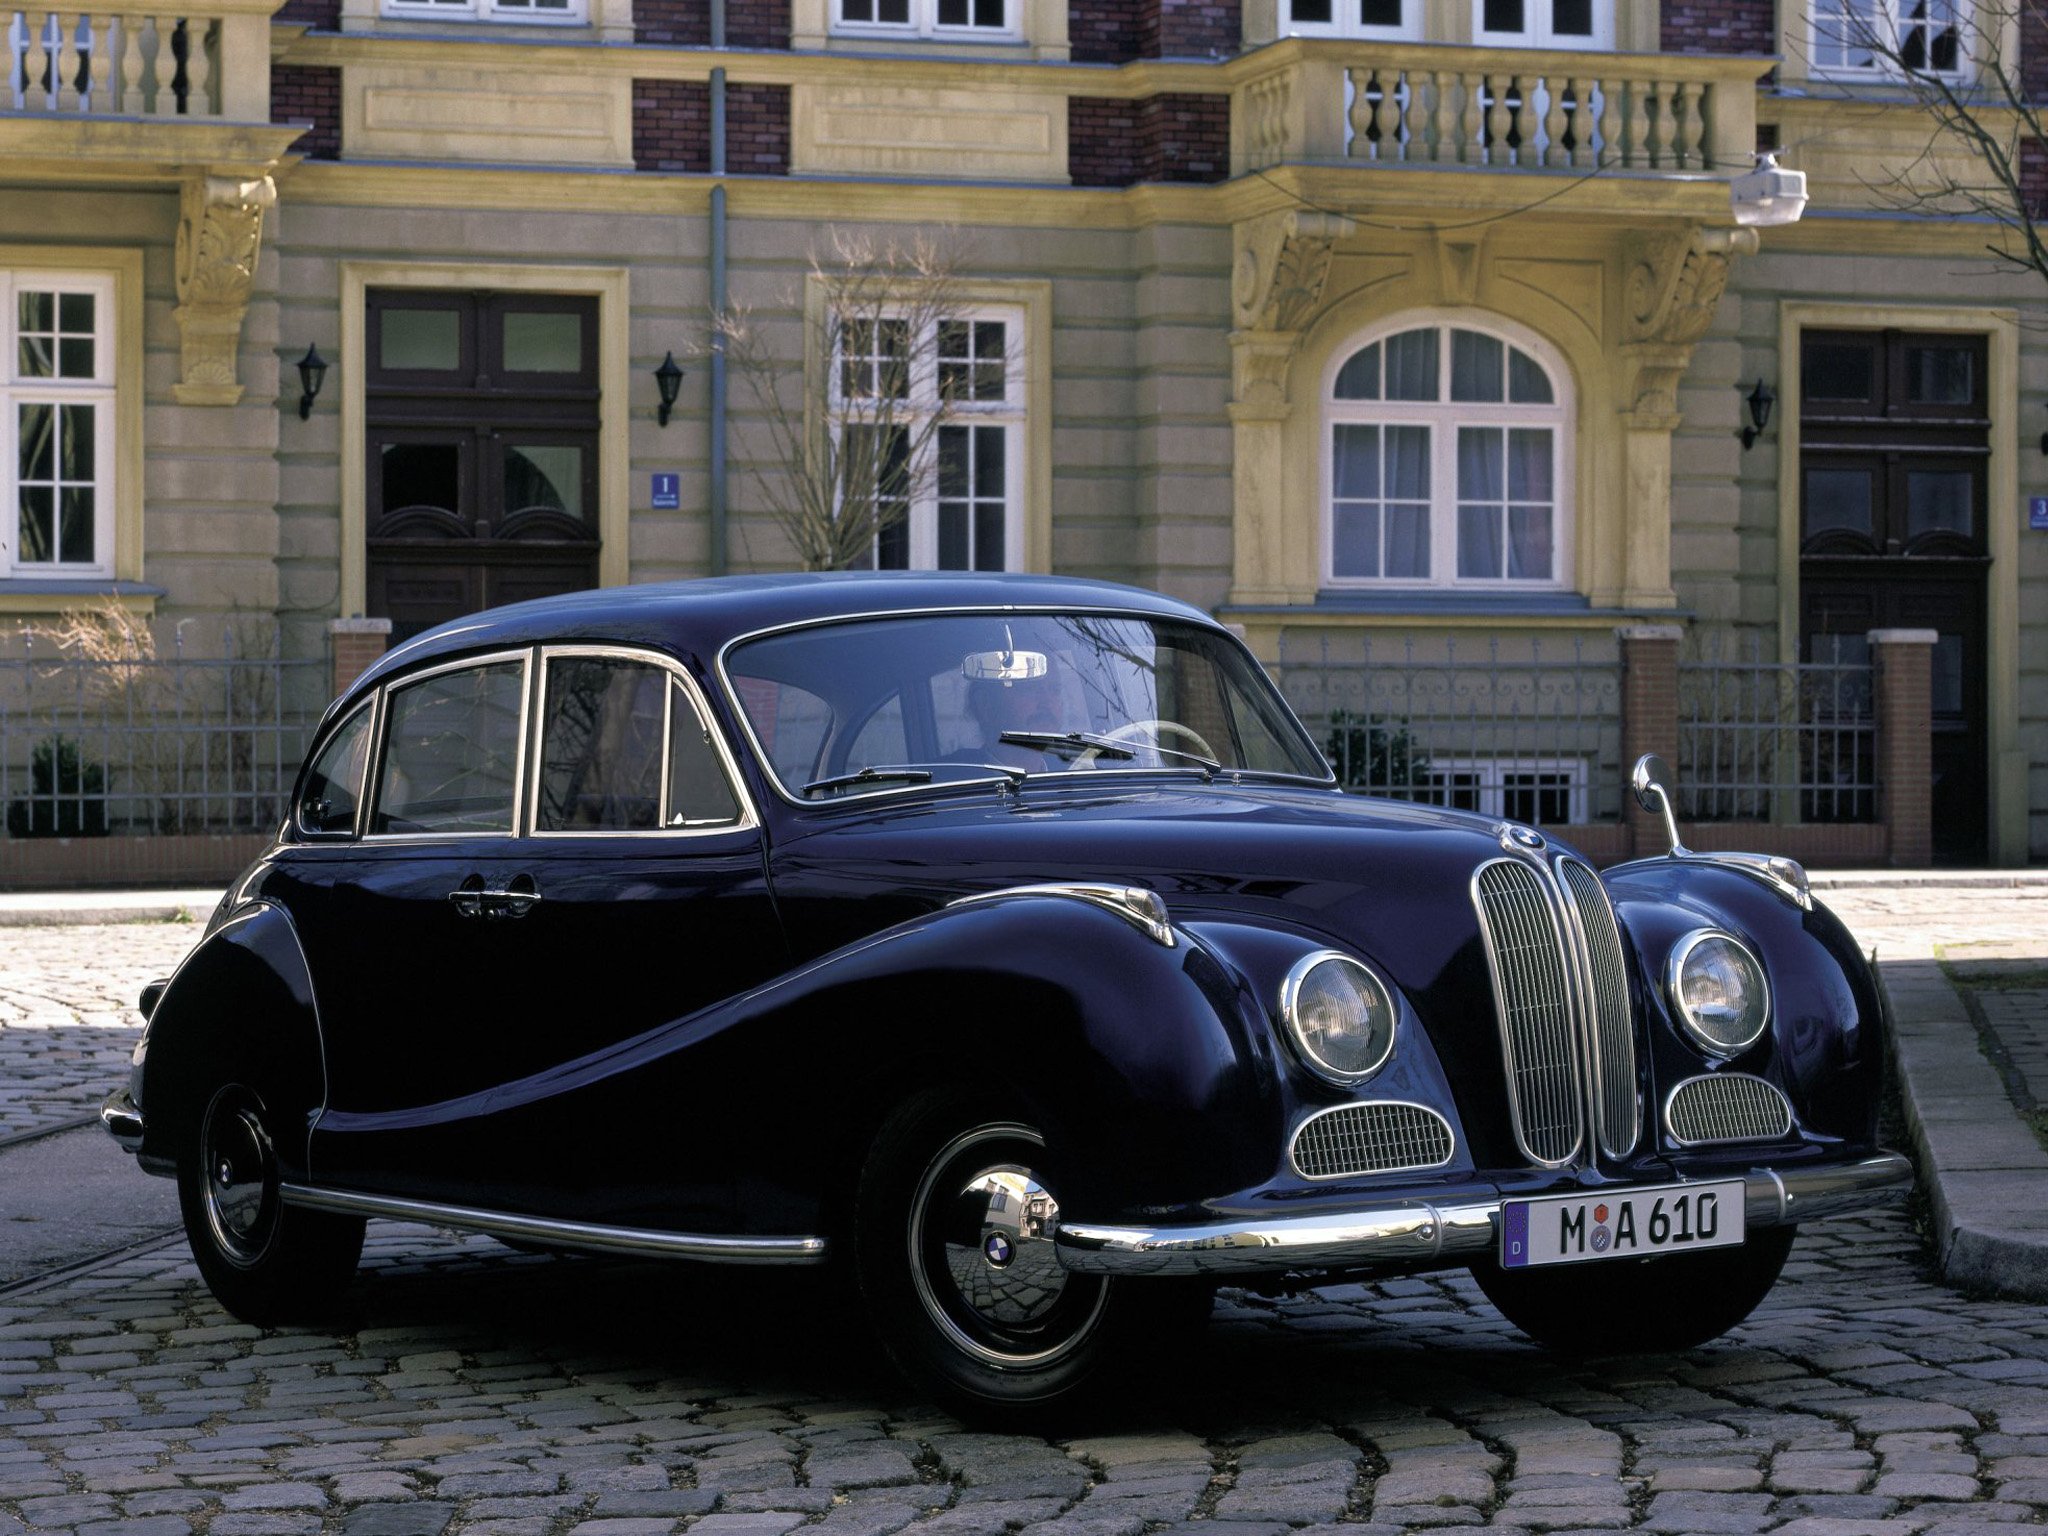 1952 BMW 501 Wallpapers | SuperCars.net - Today's ...